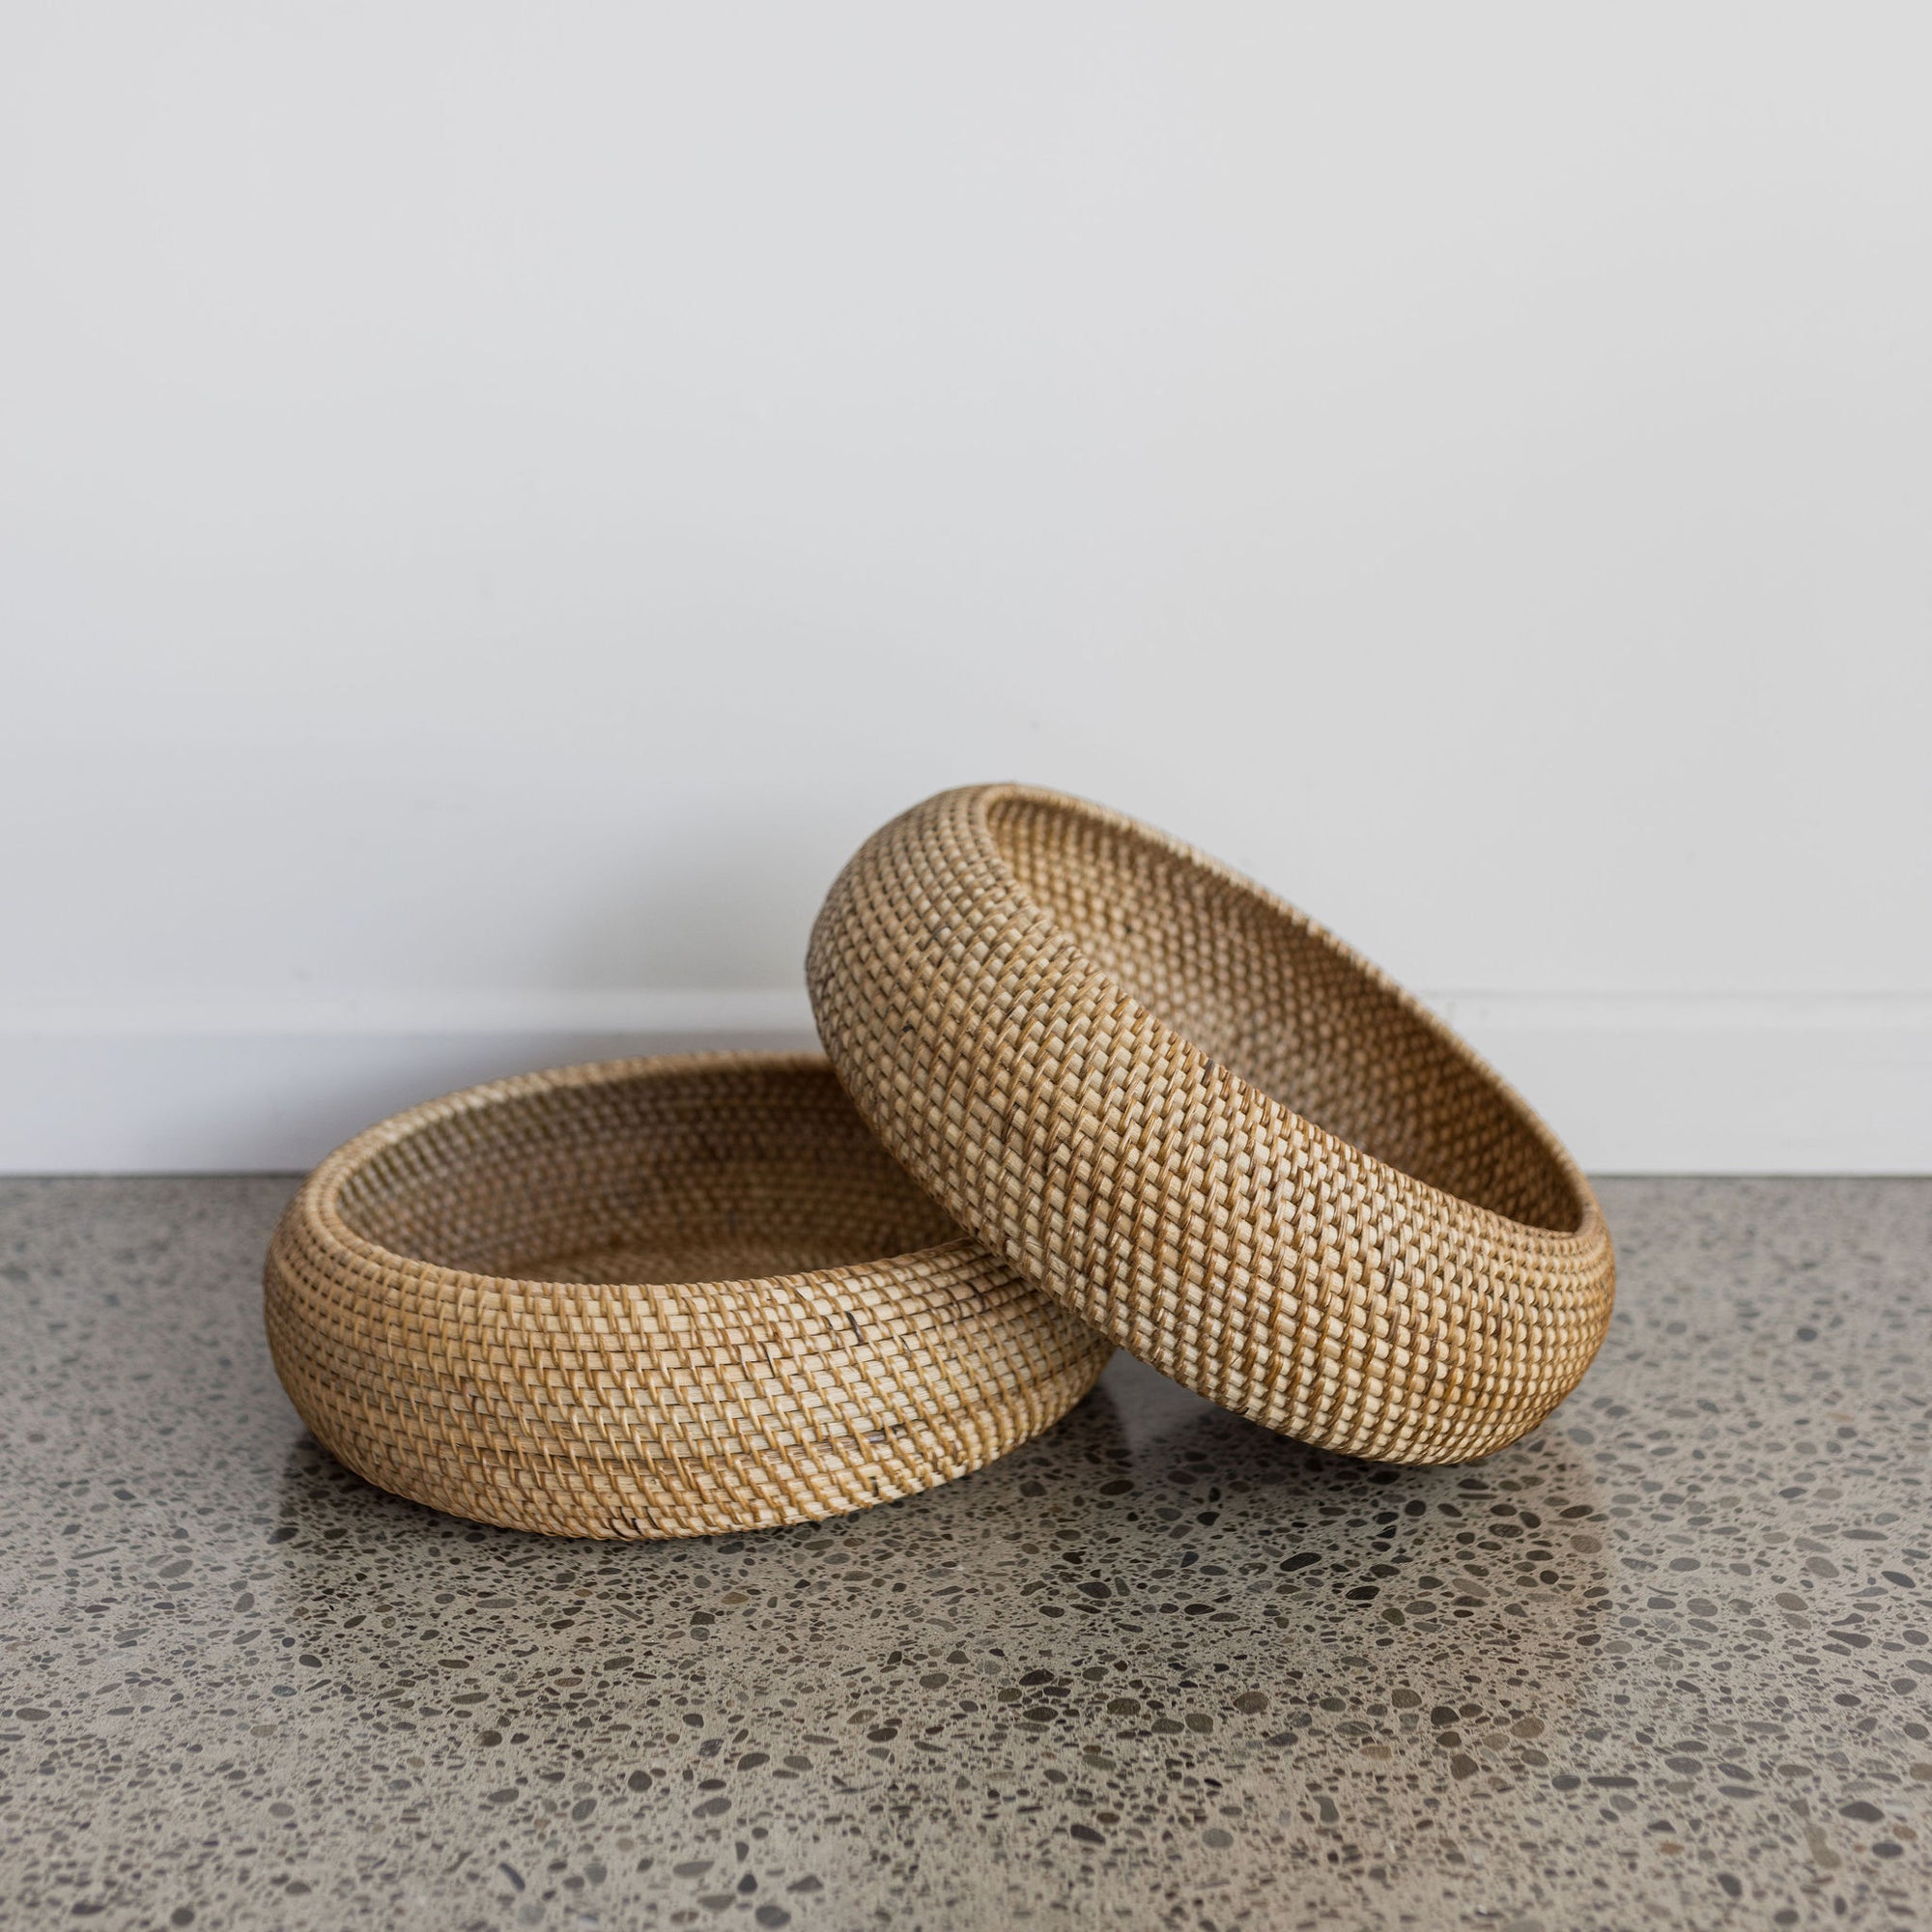 from corcovado a handwoven round rattan fruit bowl in a natural rattan finish